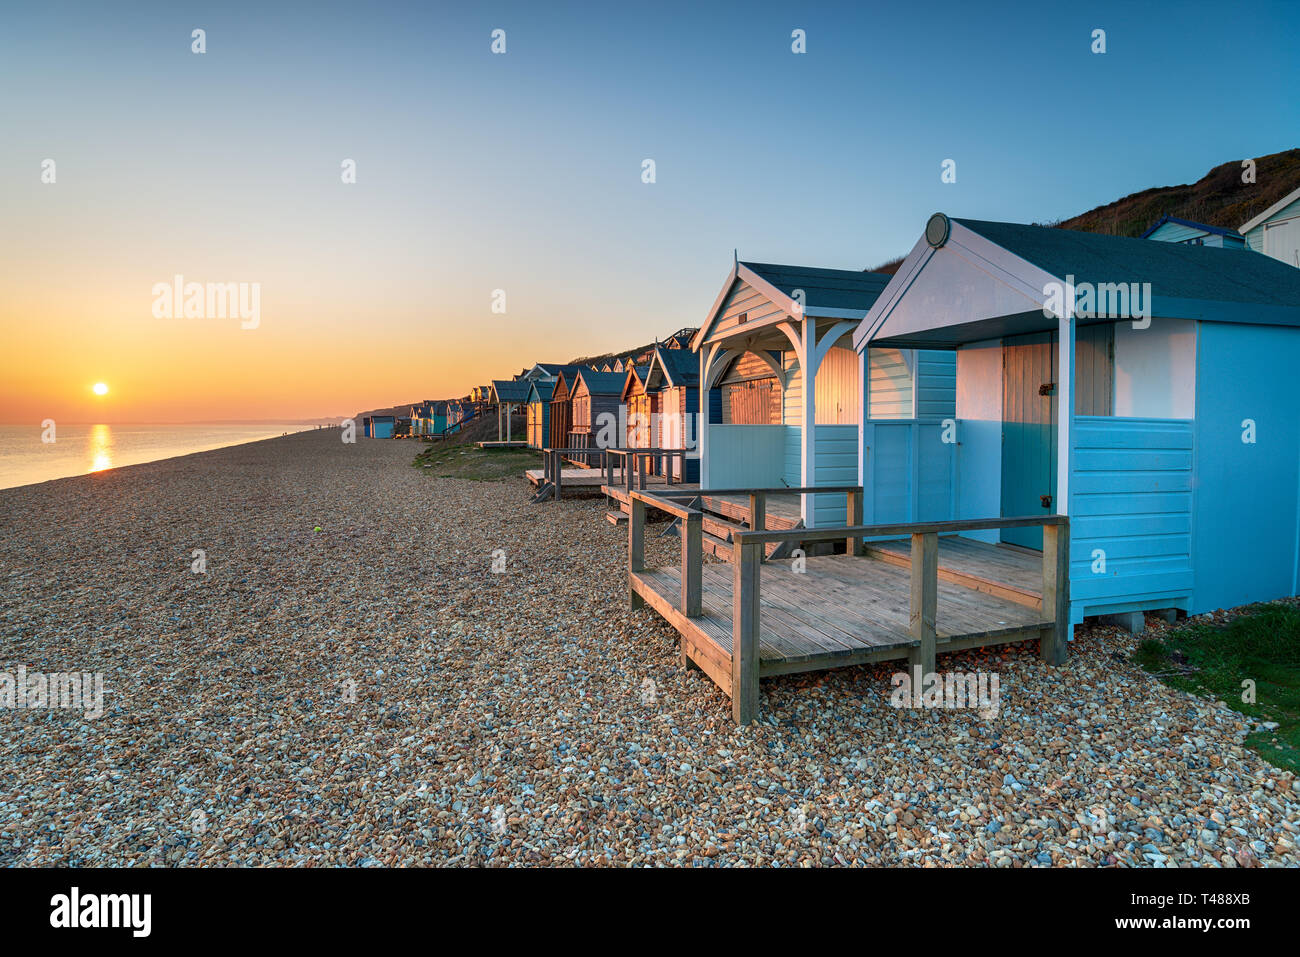 Beautiful sunset over a row of colourful beach huts at Milford on Sea on the Hampshire coast Stock Photo